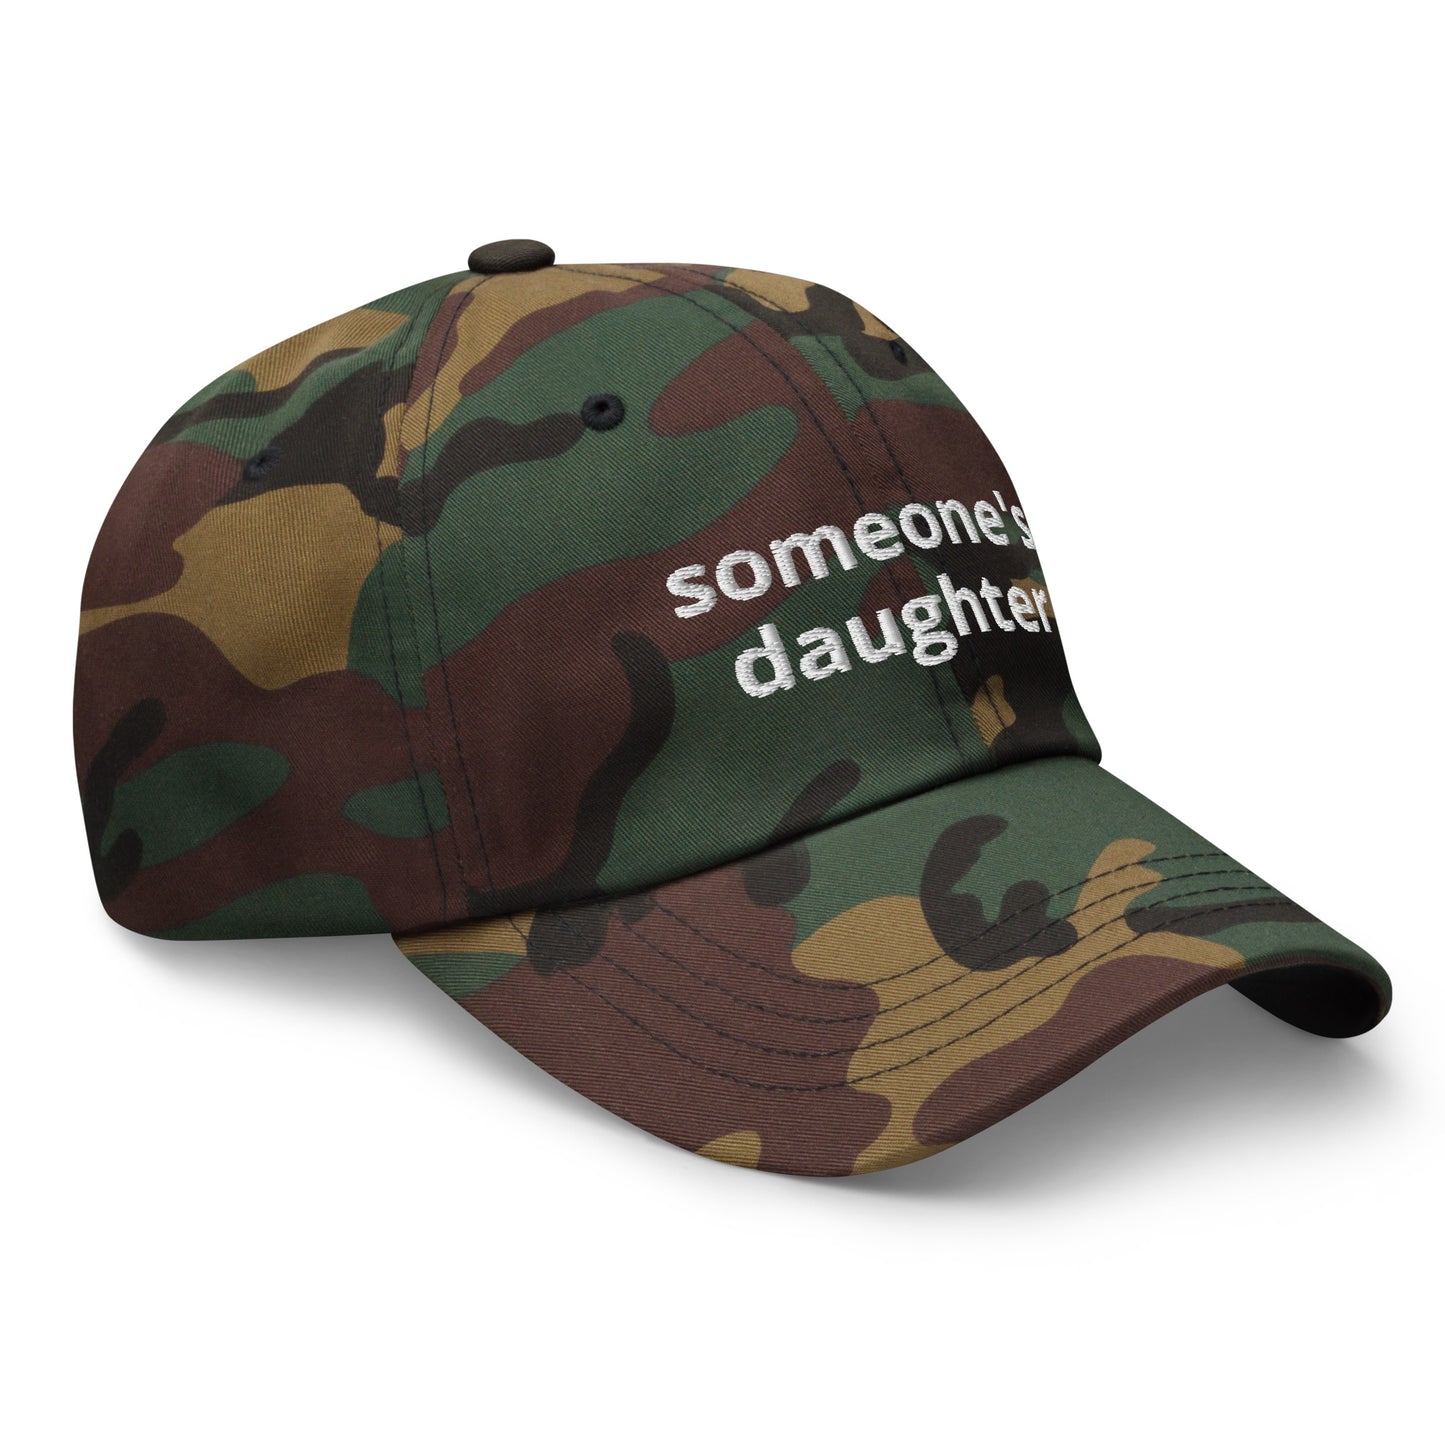 Someone's daughter dad hat